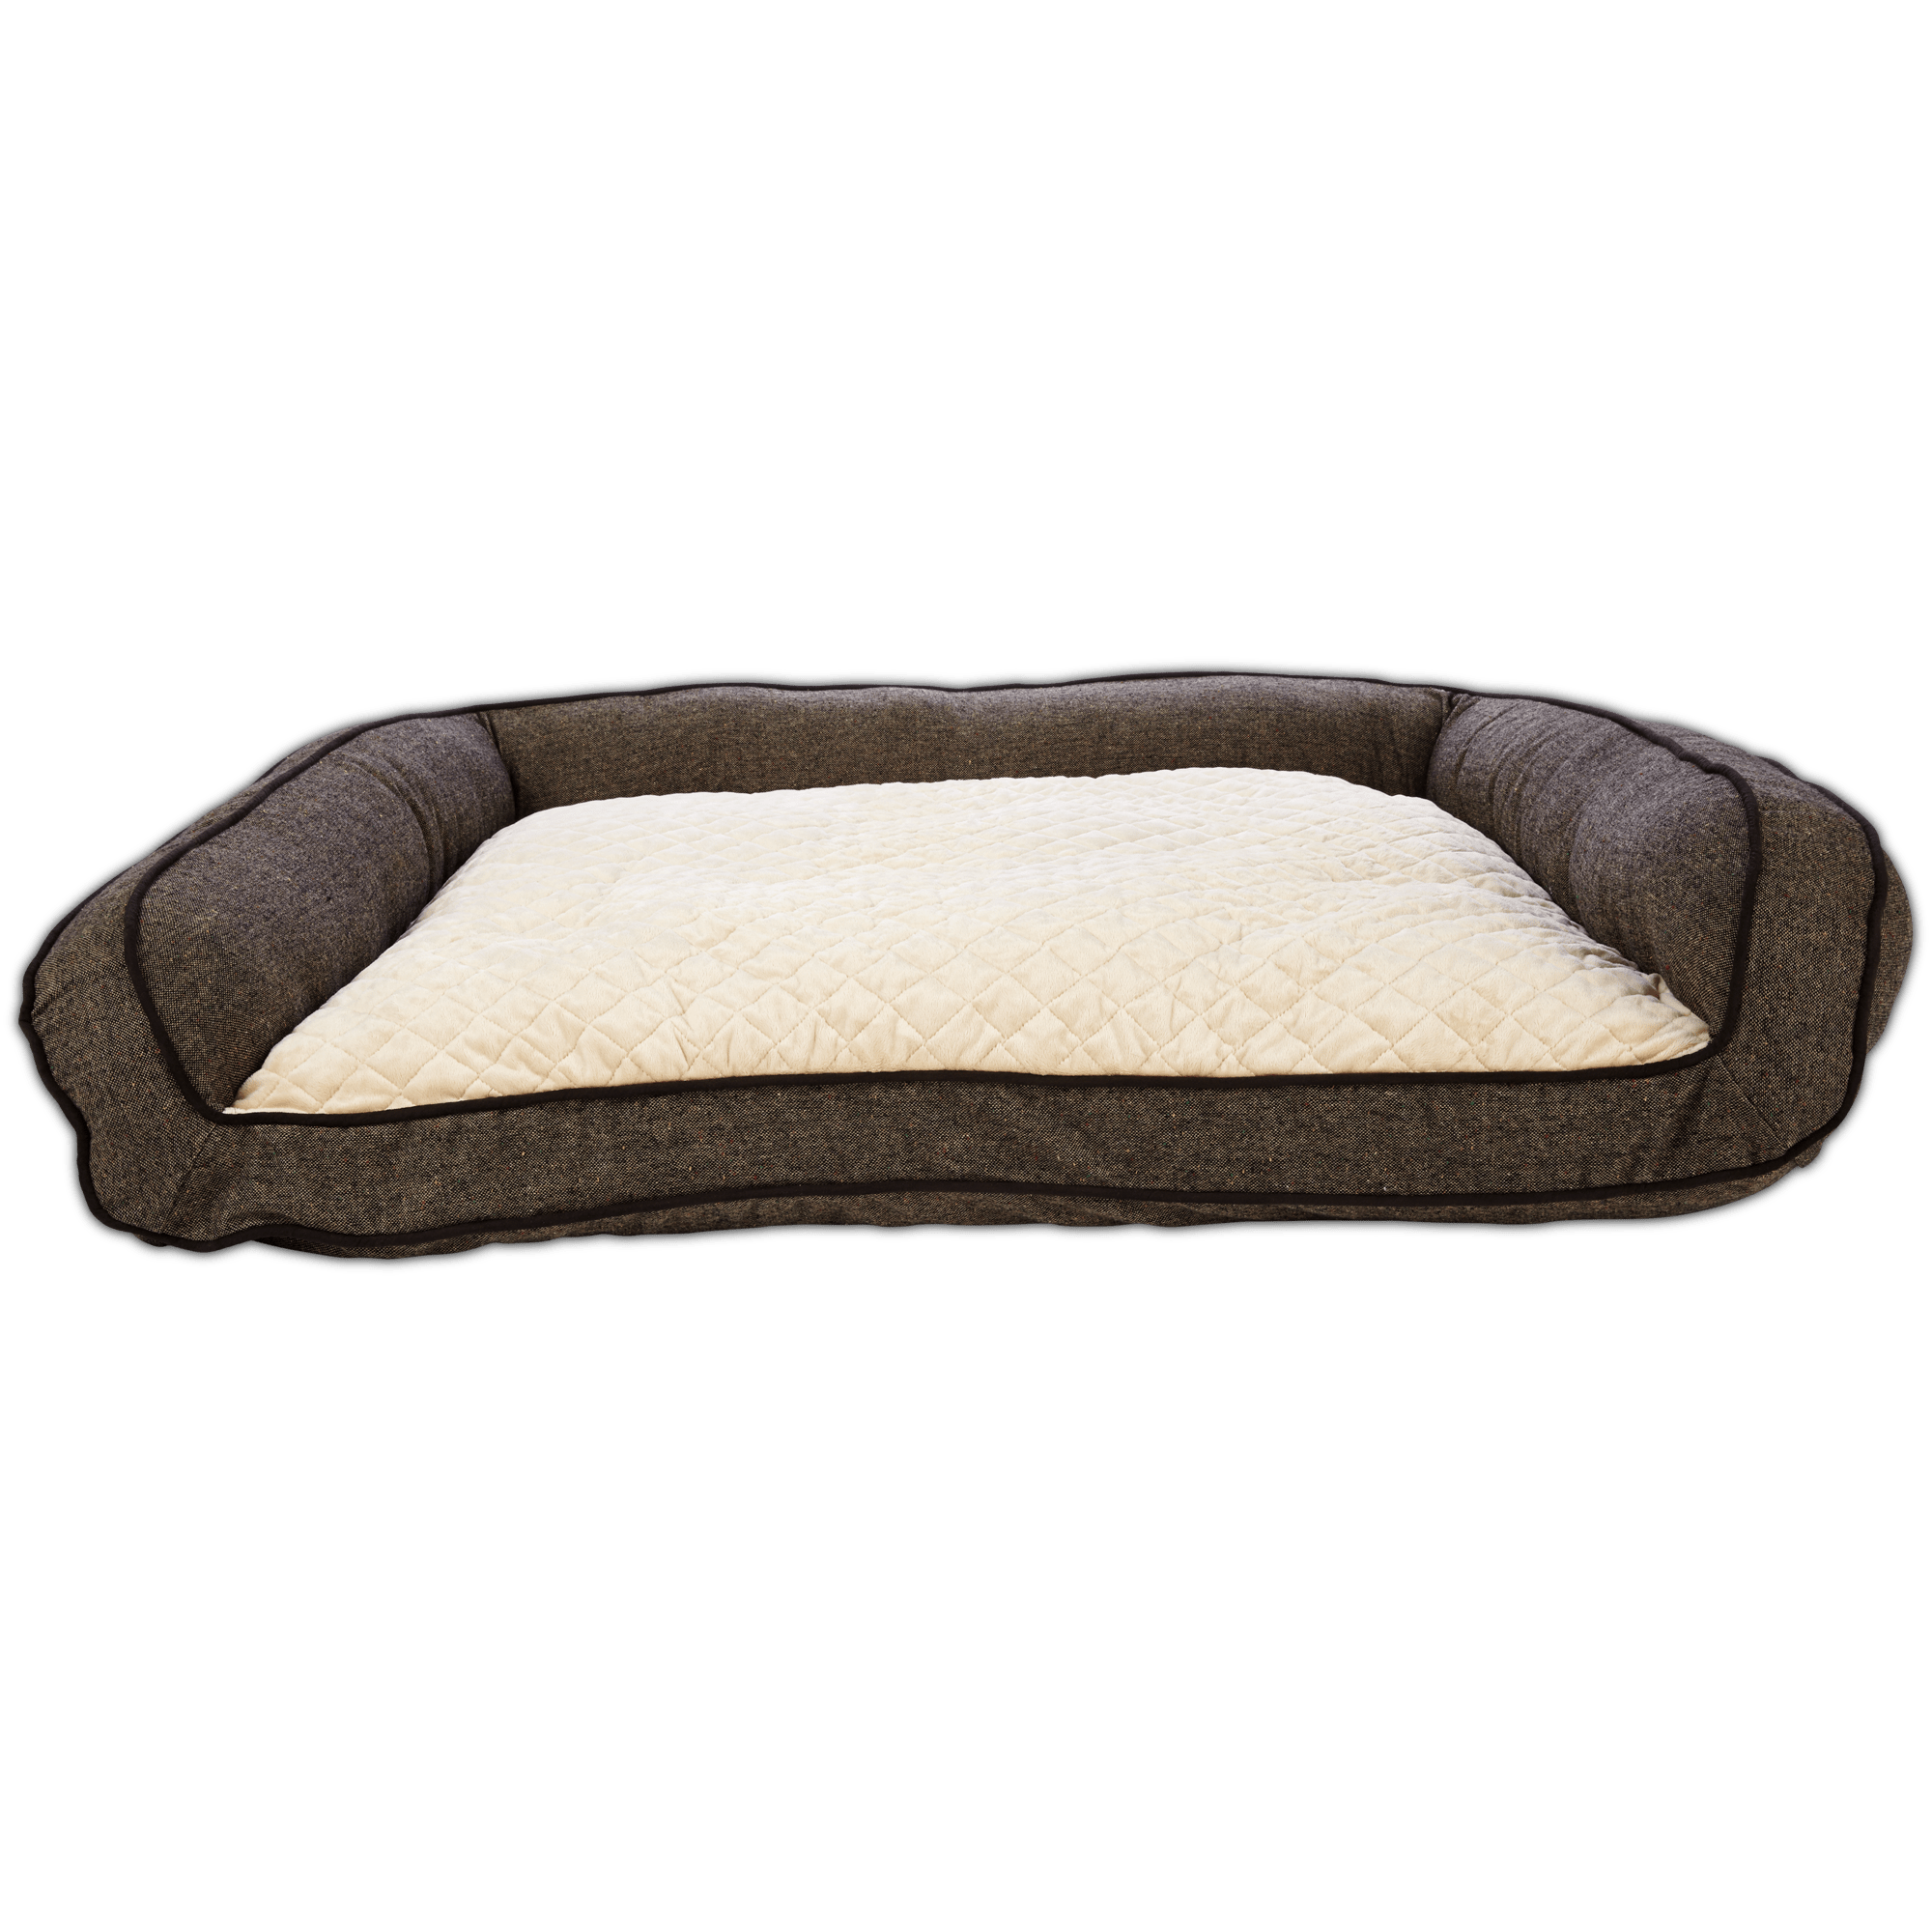 Harmony Memory Foam Couch Dog Bed in Brown, 48